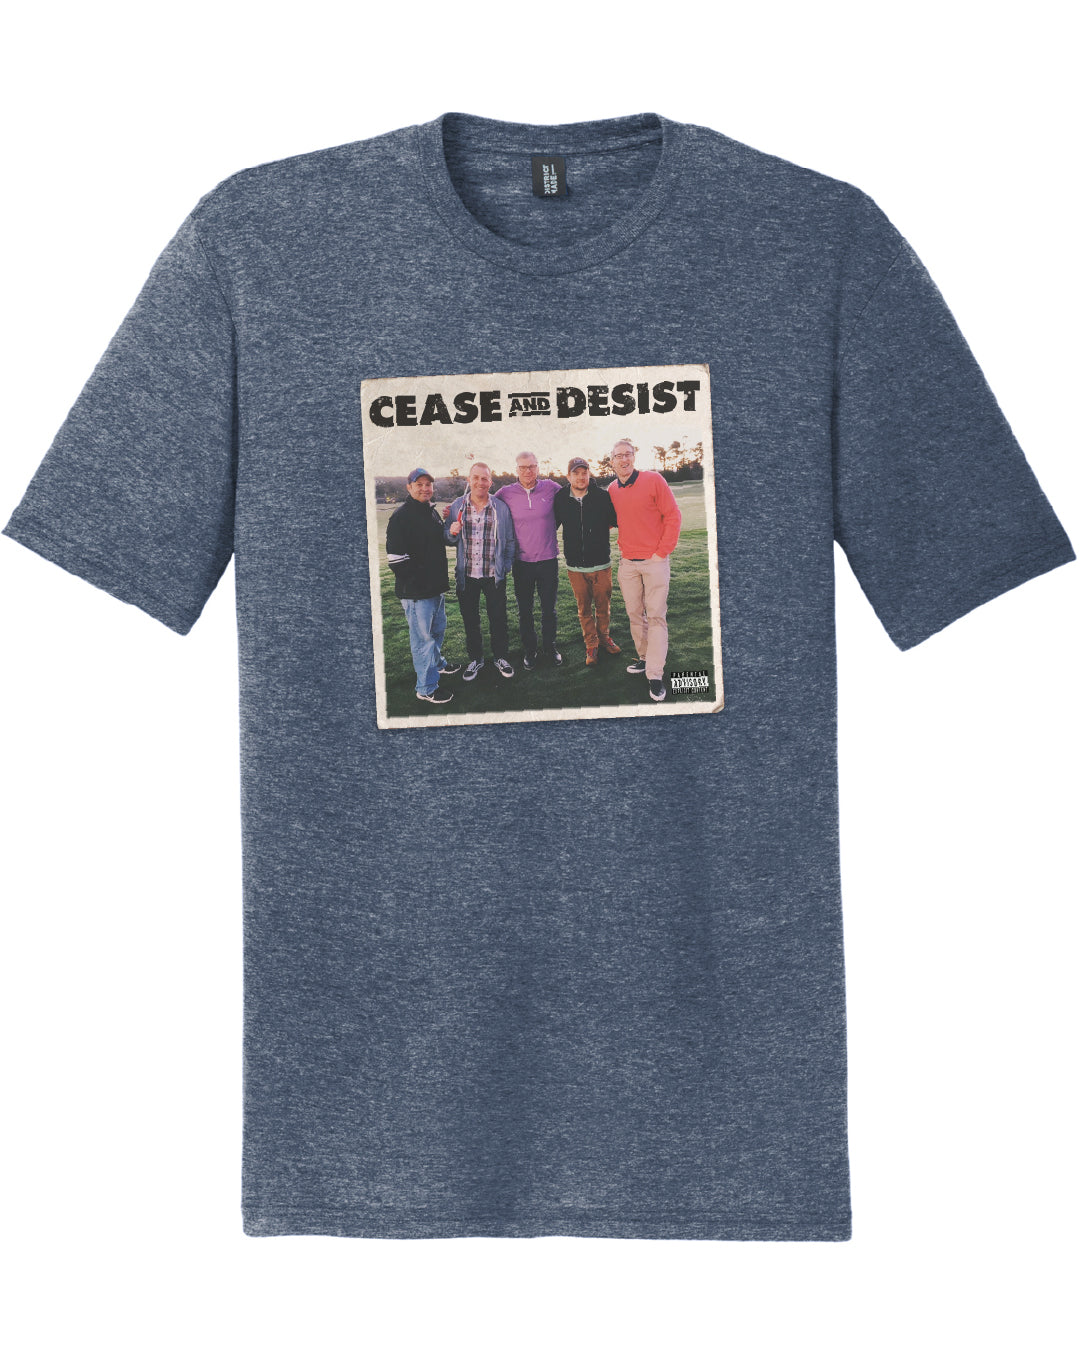 Cease and Desist T-Shirt